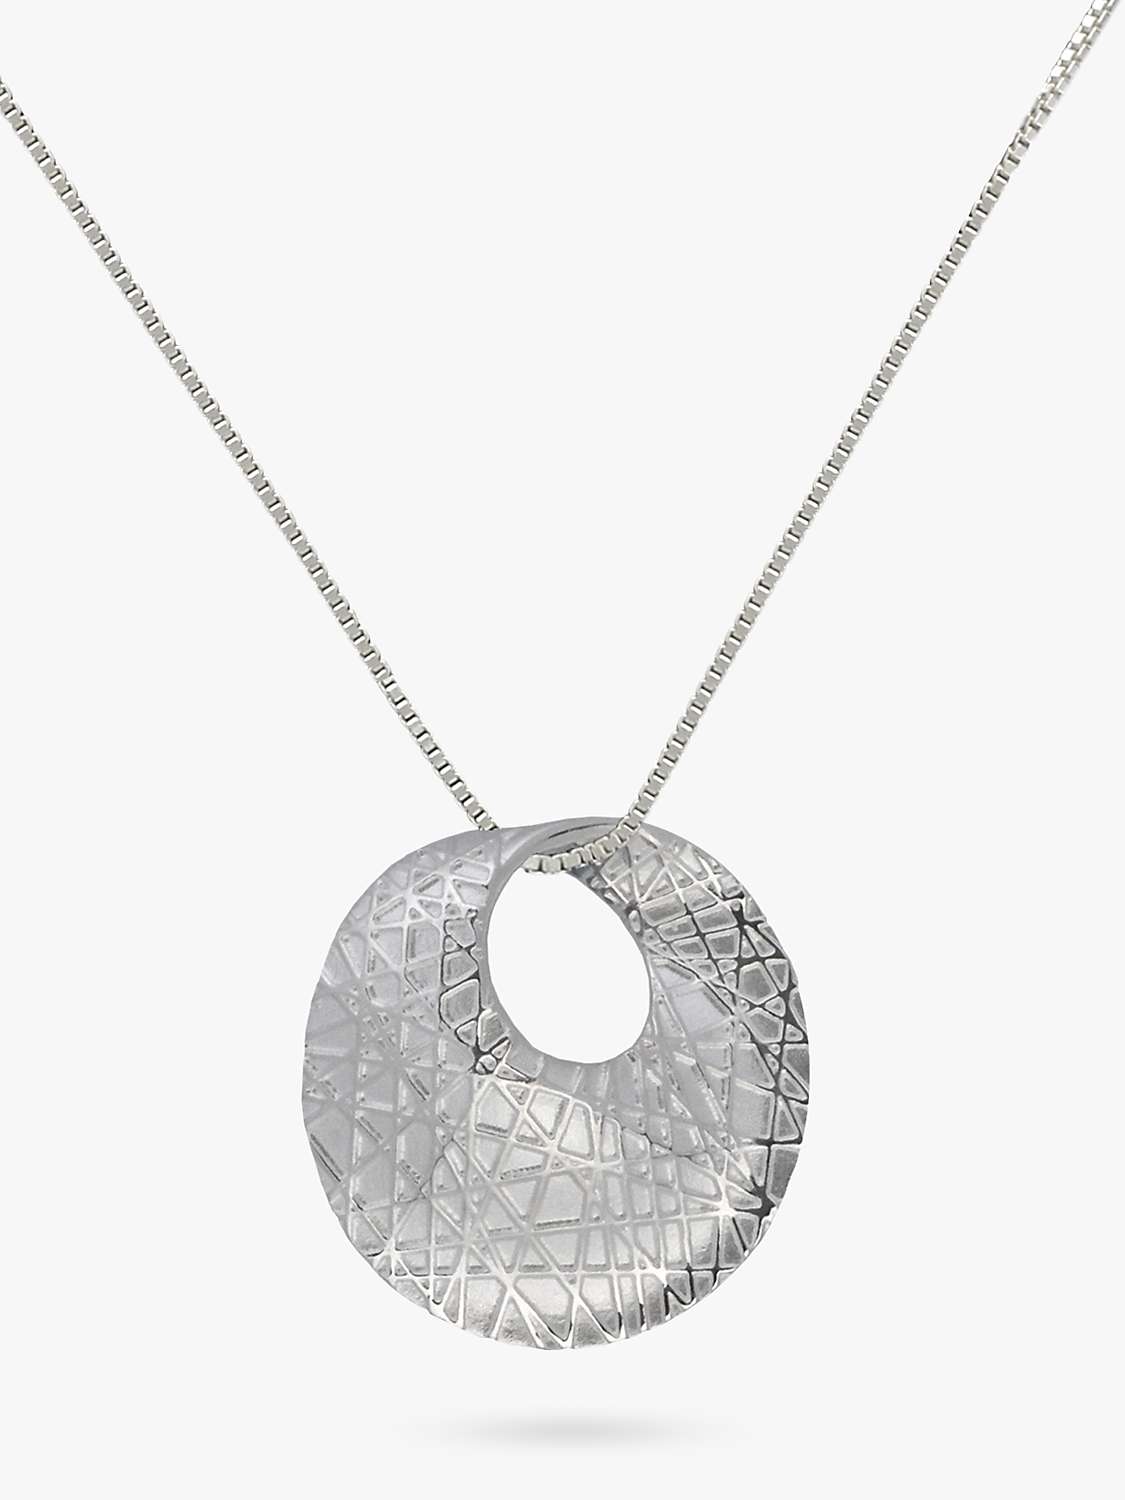 Buy Nina B Textured Mobious Round Pendant Necklace, Silver Online at johnlewis.com